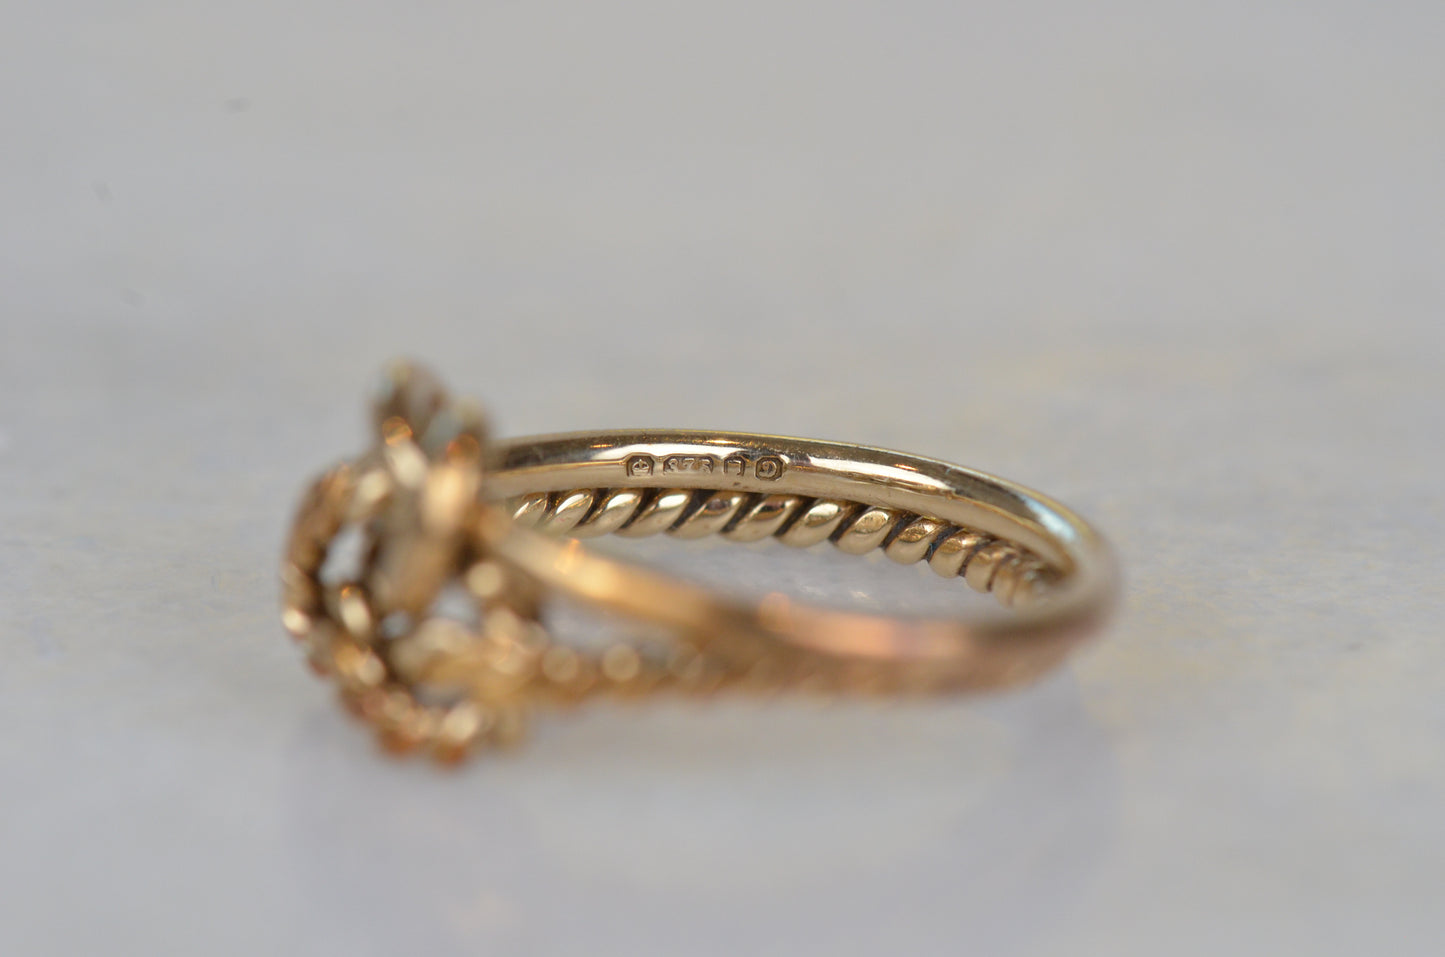 Charming Vintage Knot Ring